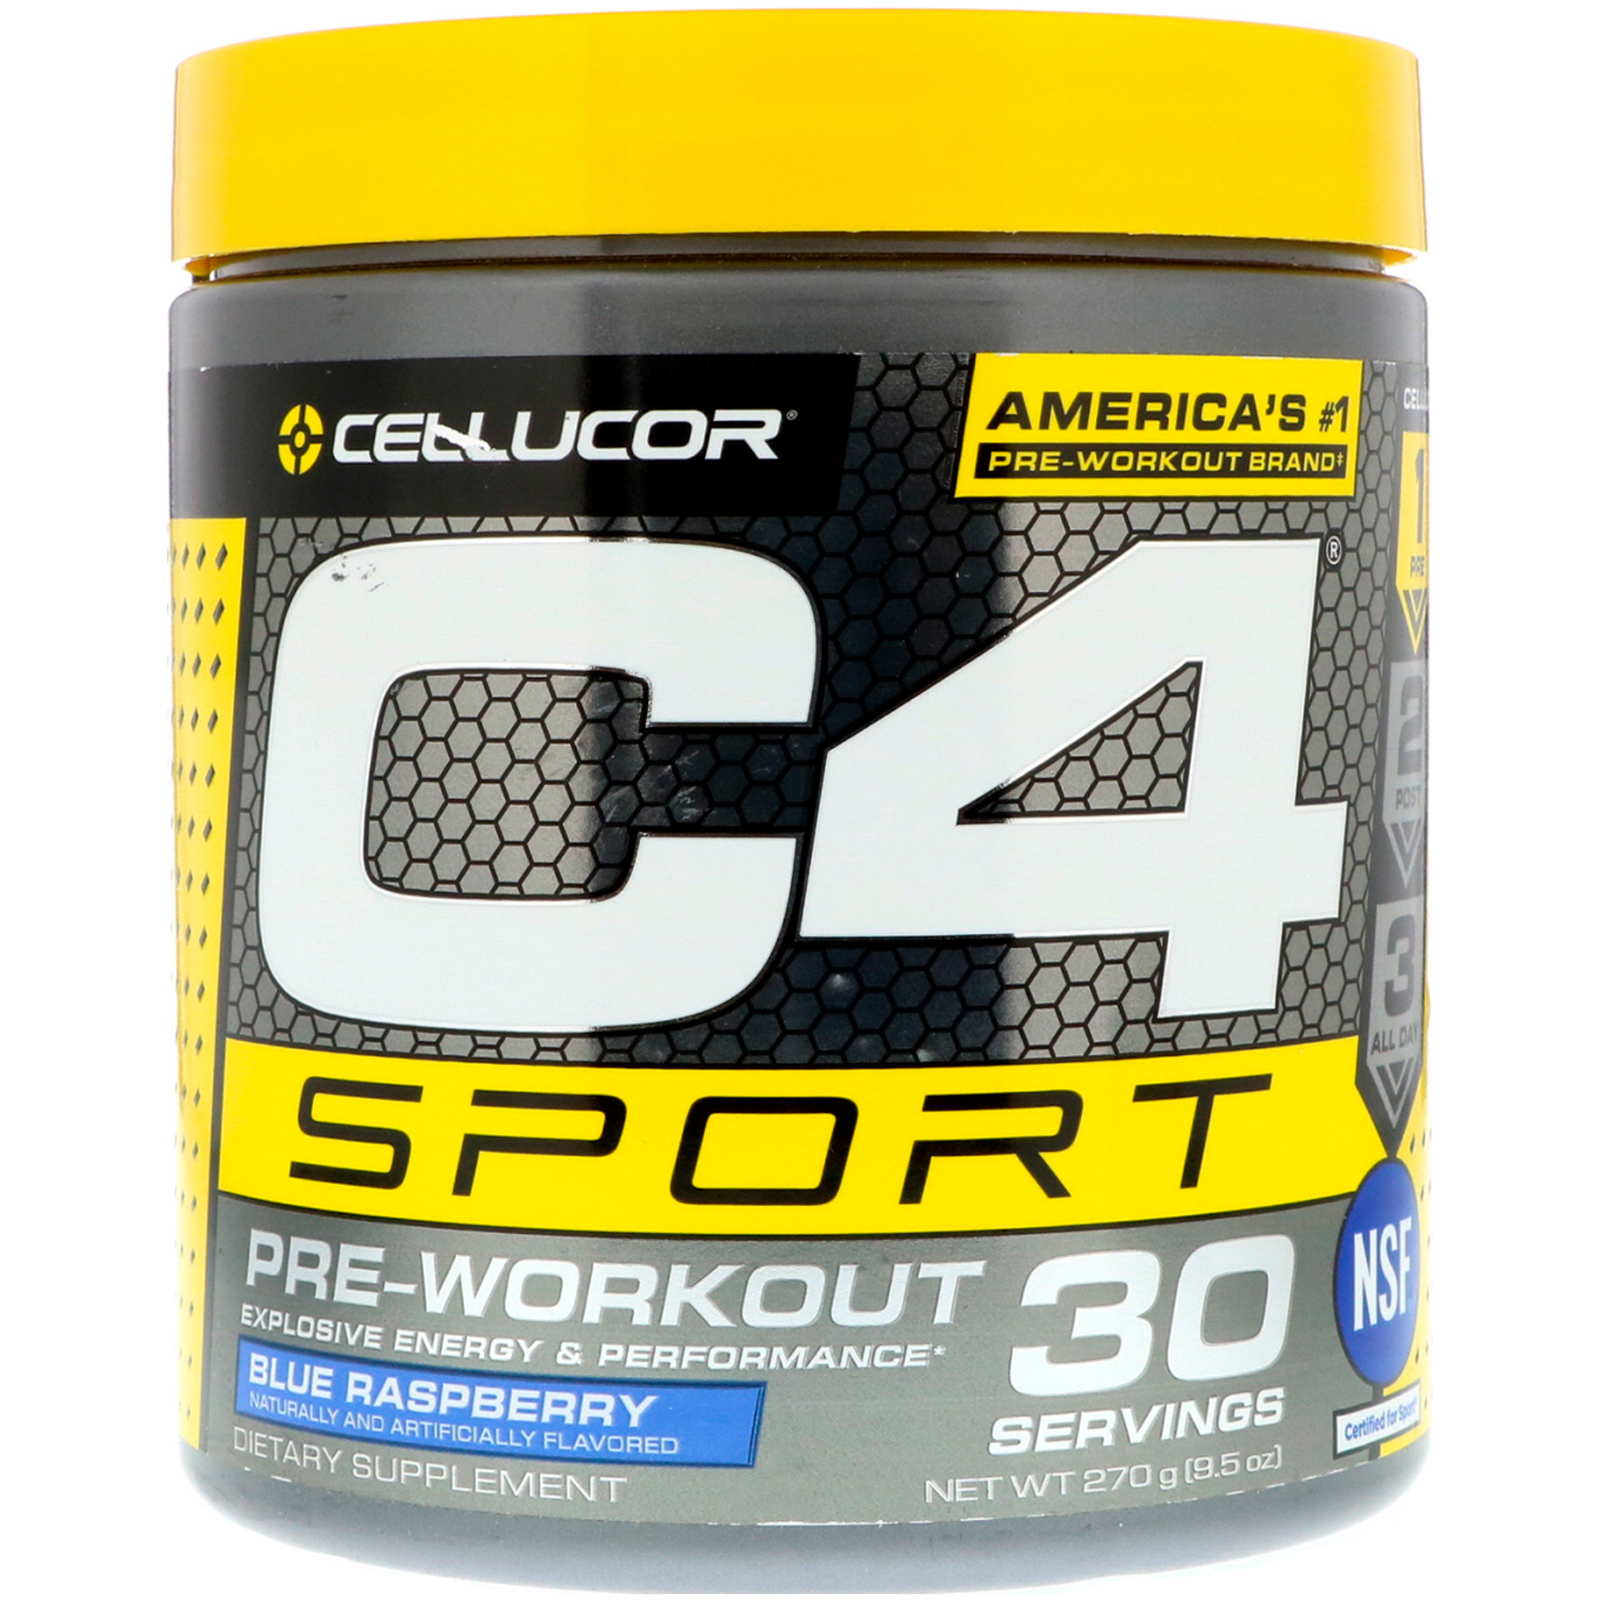 Simple What is the best c4 pre workout for Gym